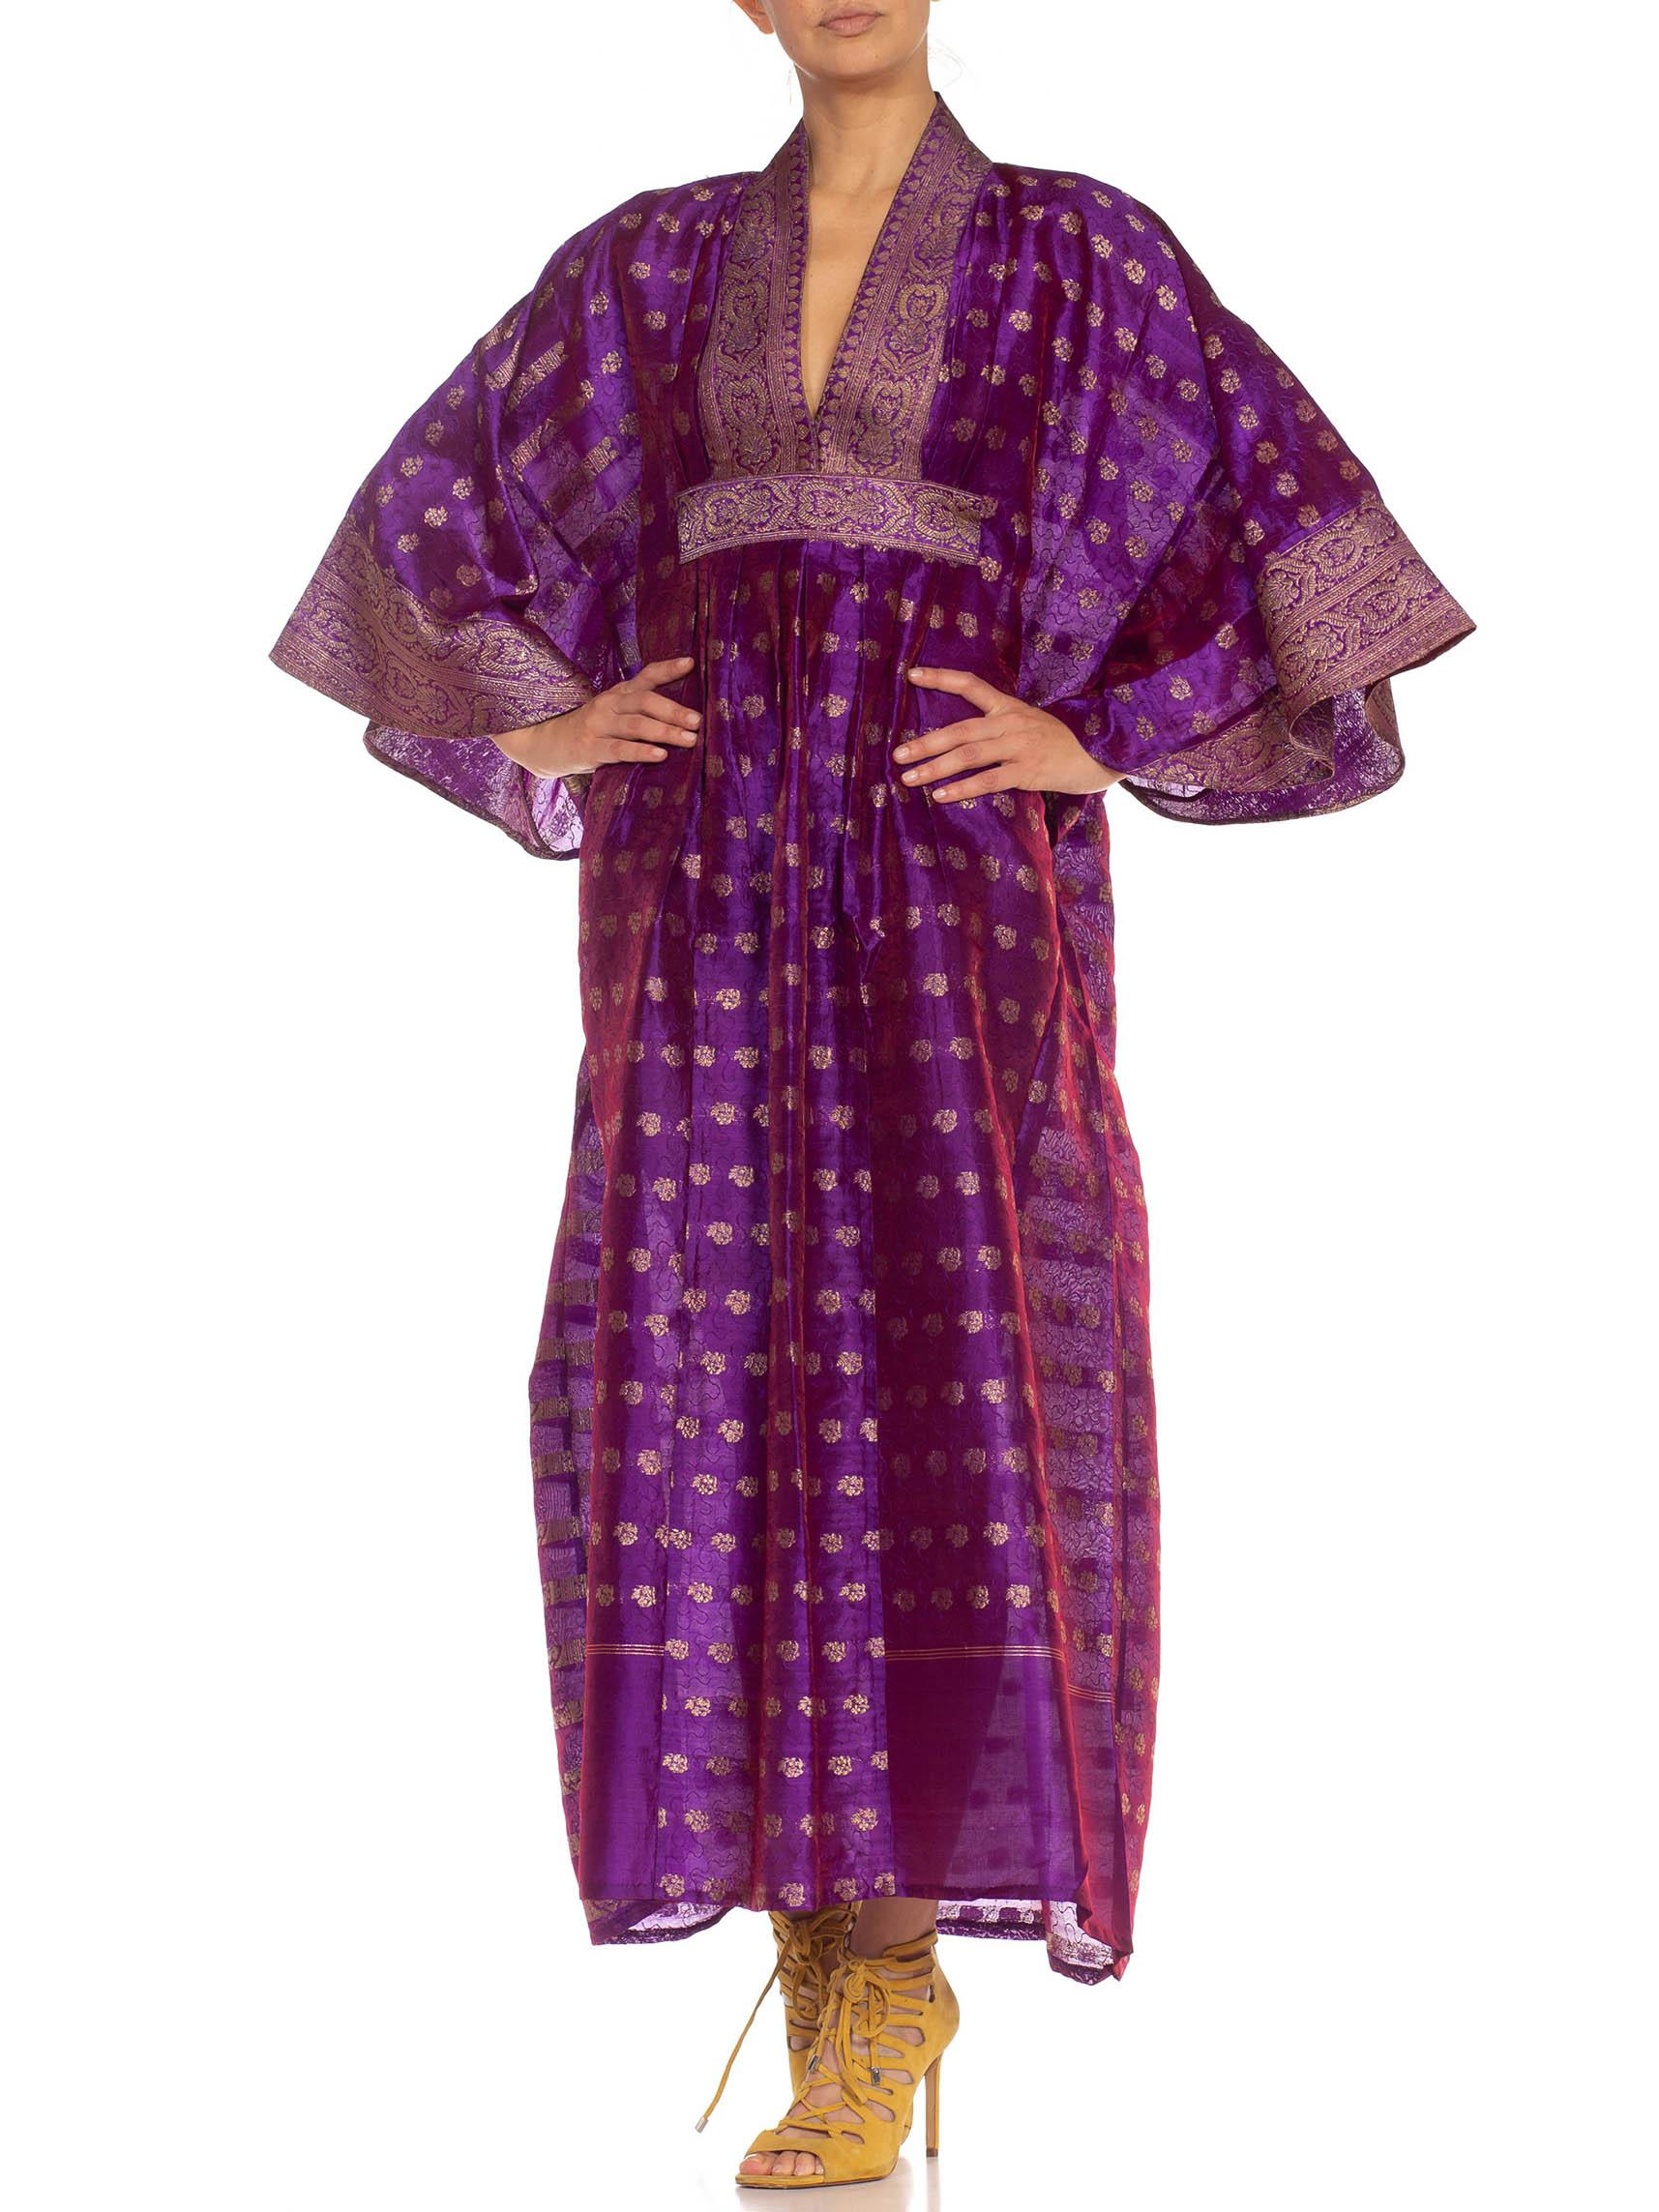 MORPHEW COLLECTION Purple & Gold Silk Kaftan Made From Vintage Saris For Sale 3